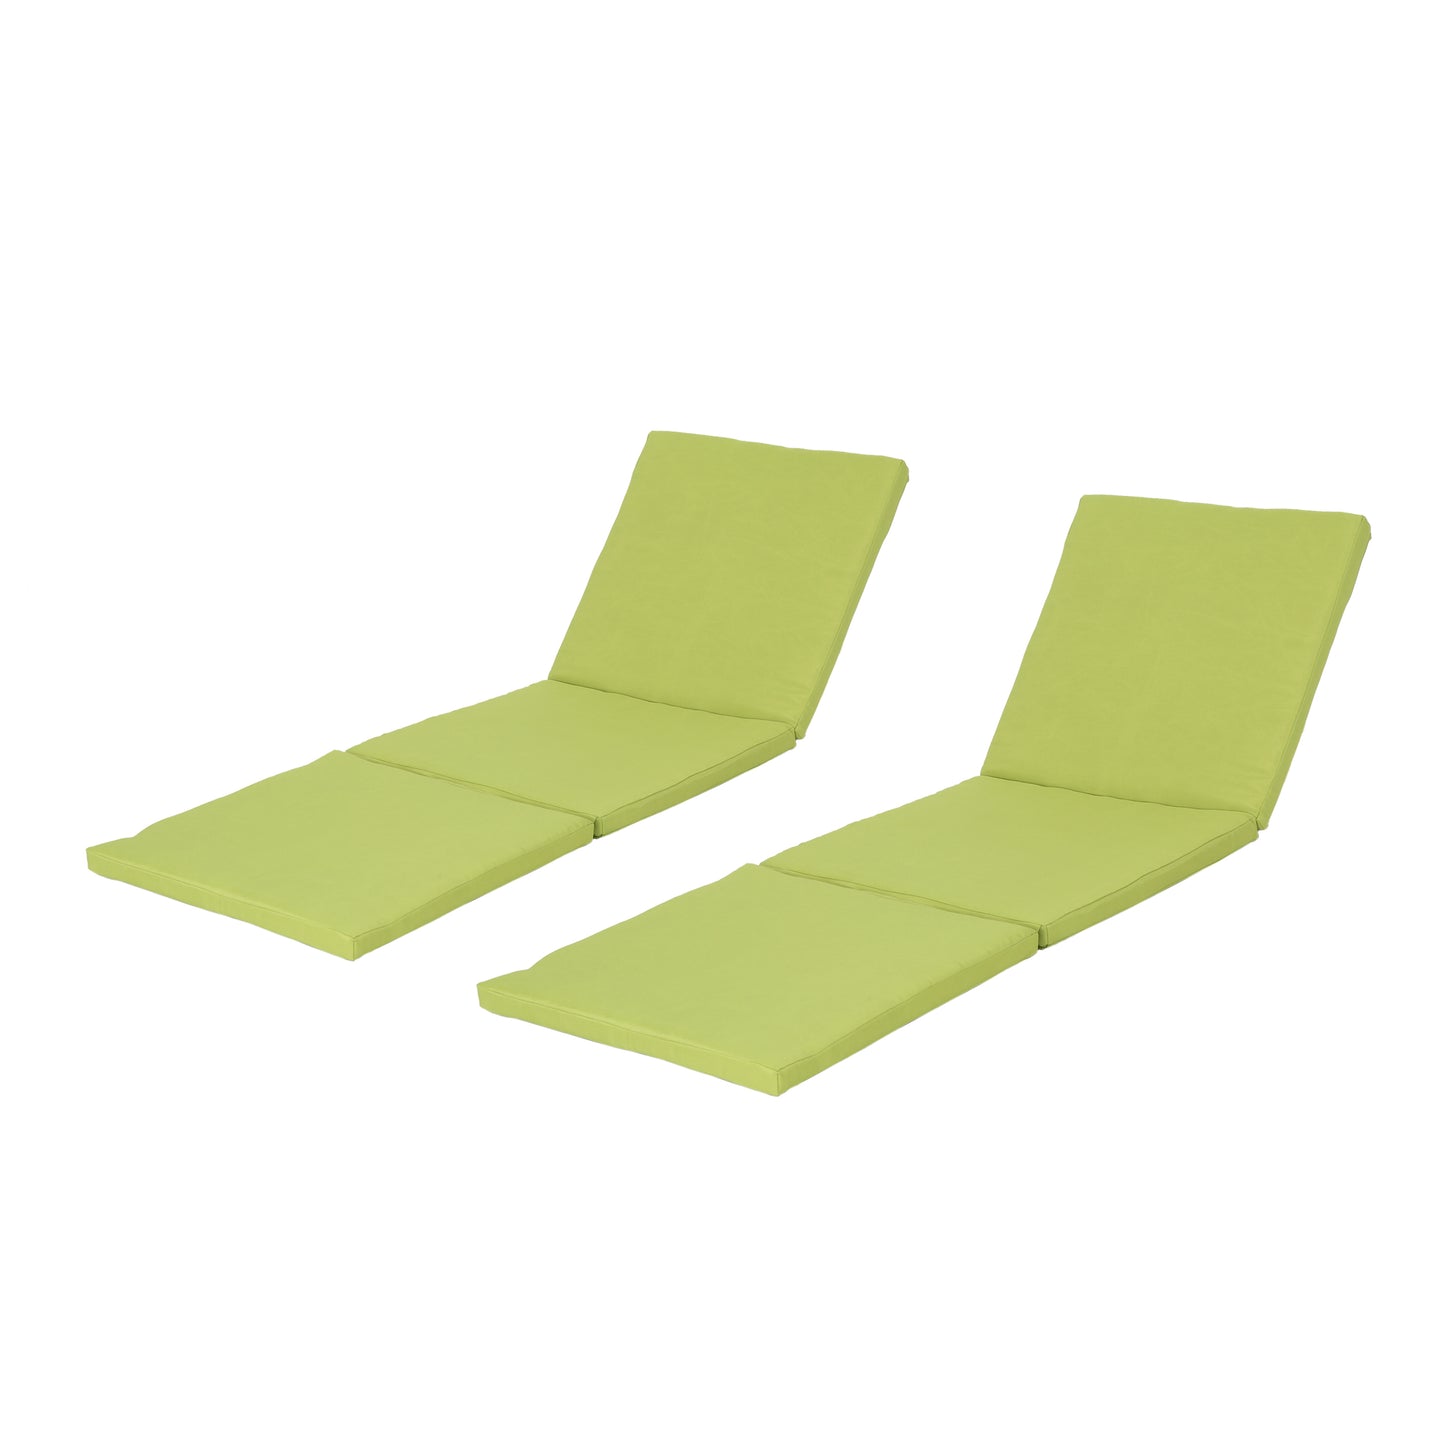 Daisy Outdoor Water Resistant Chaise Lounge Cushion (Set of 2)